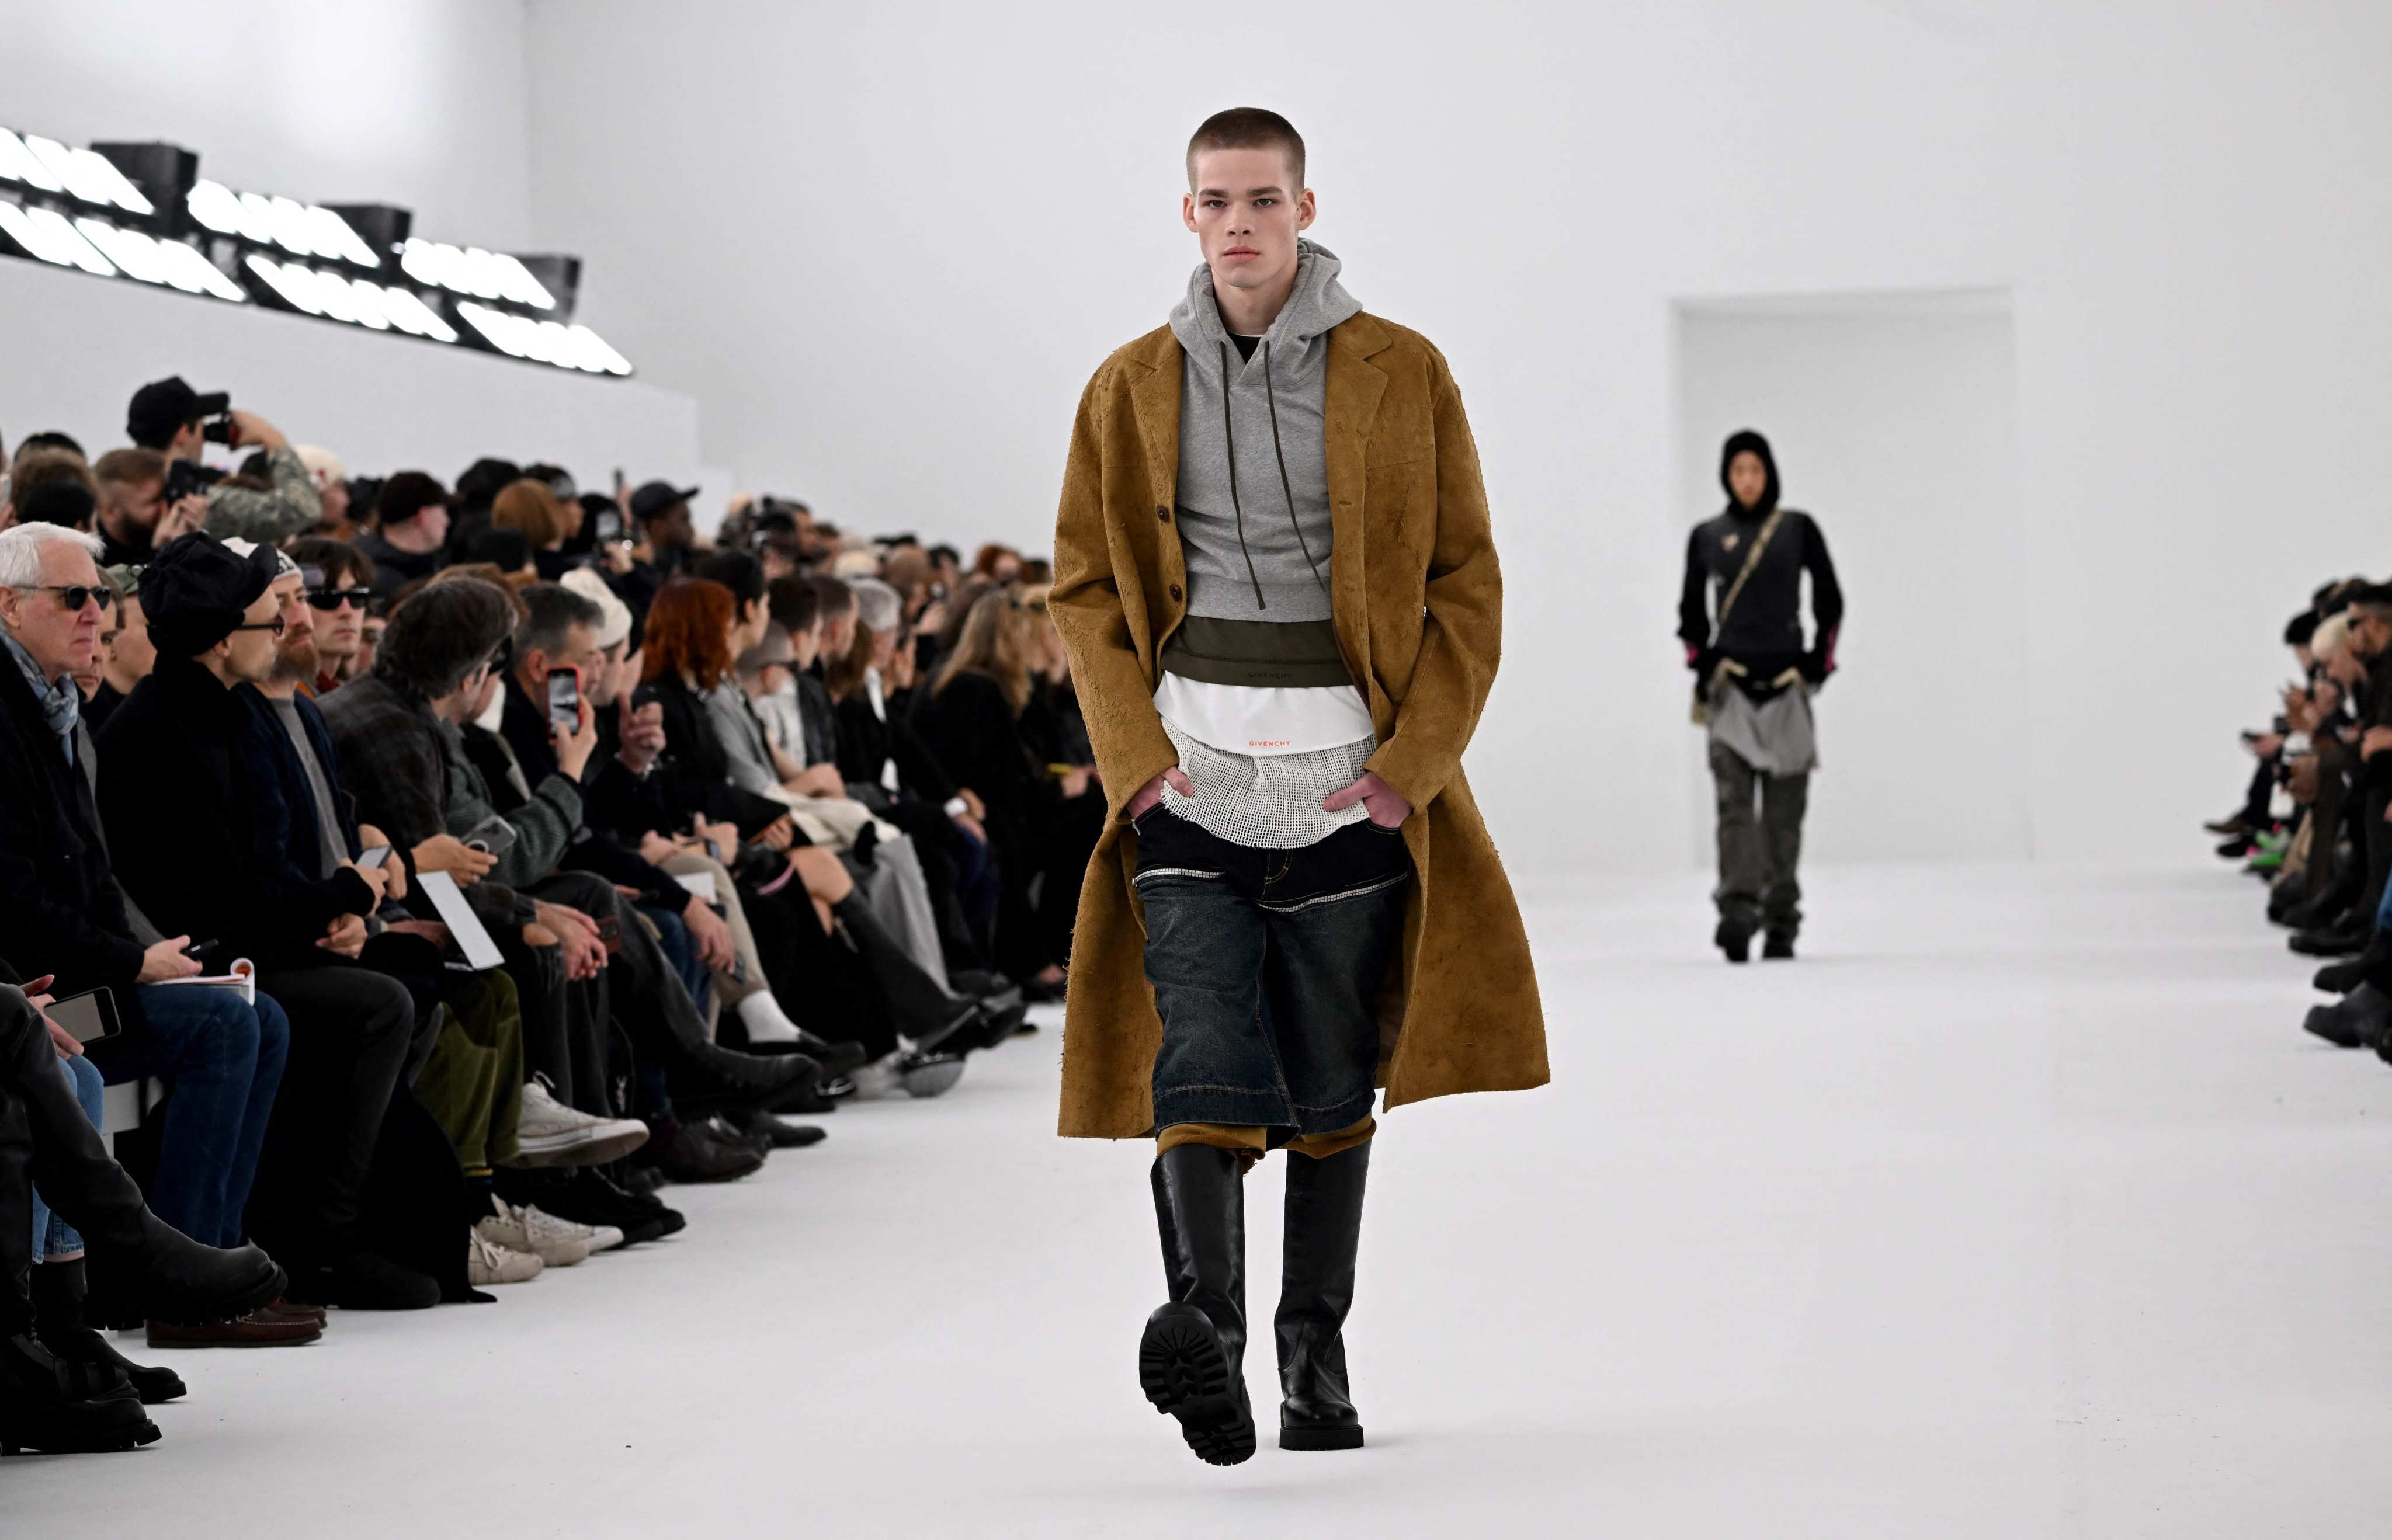 Paris Fashion Week 2023: 4 menswear highlights for AW23/24, from Emily in  Paris' Lucas Bravo on LGN's American Psycho-themed catwalk and Givenchy  minimalism, to Matrix-style coats with Saint Laurent